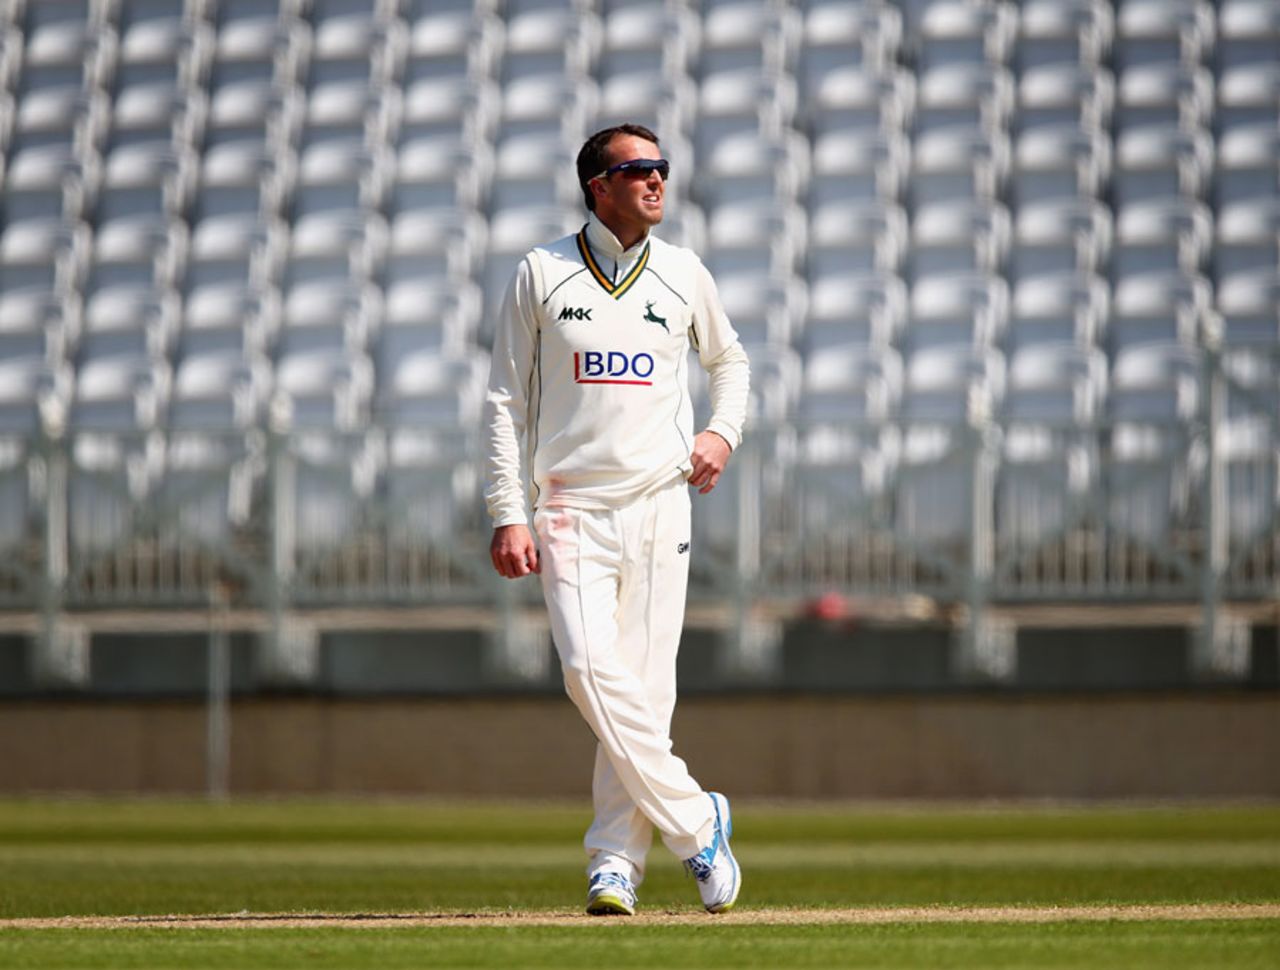 Graeme Swann had figures of 0 for 90 on his first bowl after surgery, Yorkshire v Derbyshire, County Championship, Division One, Headingley, 3rd day, May 1, 2013